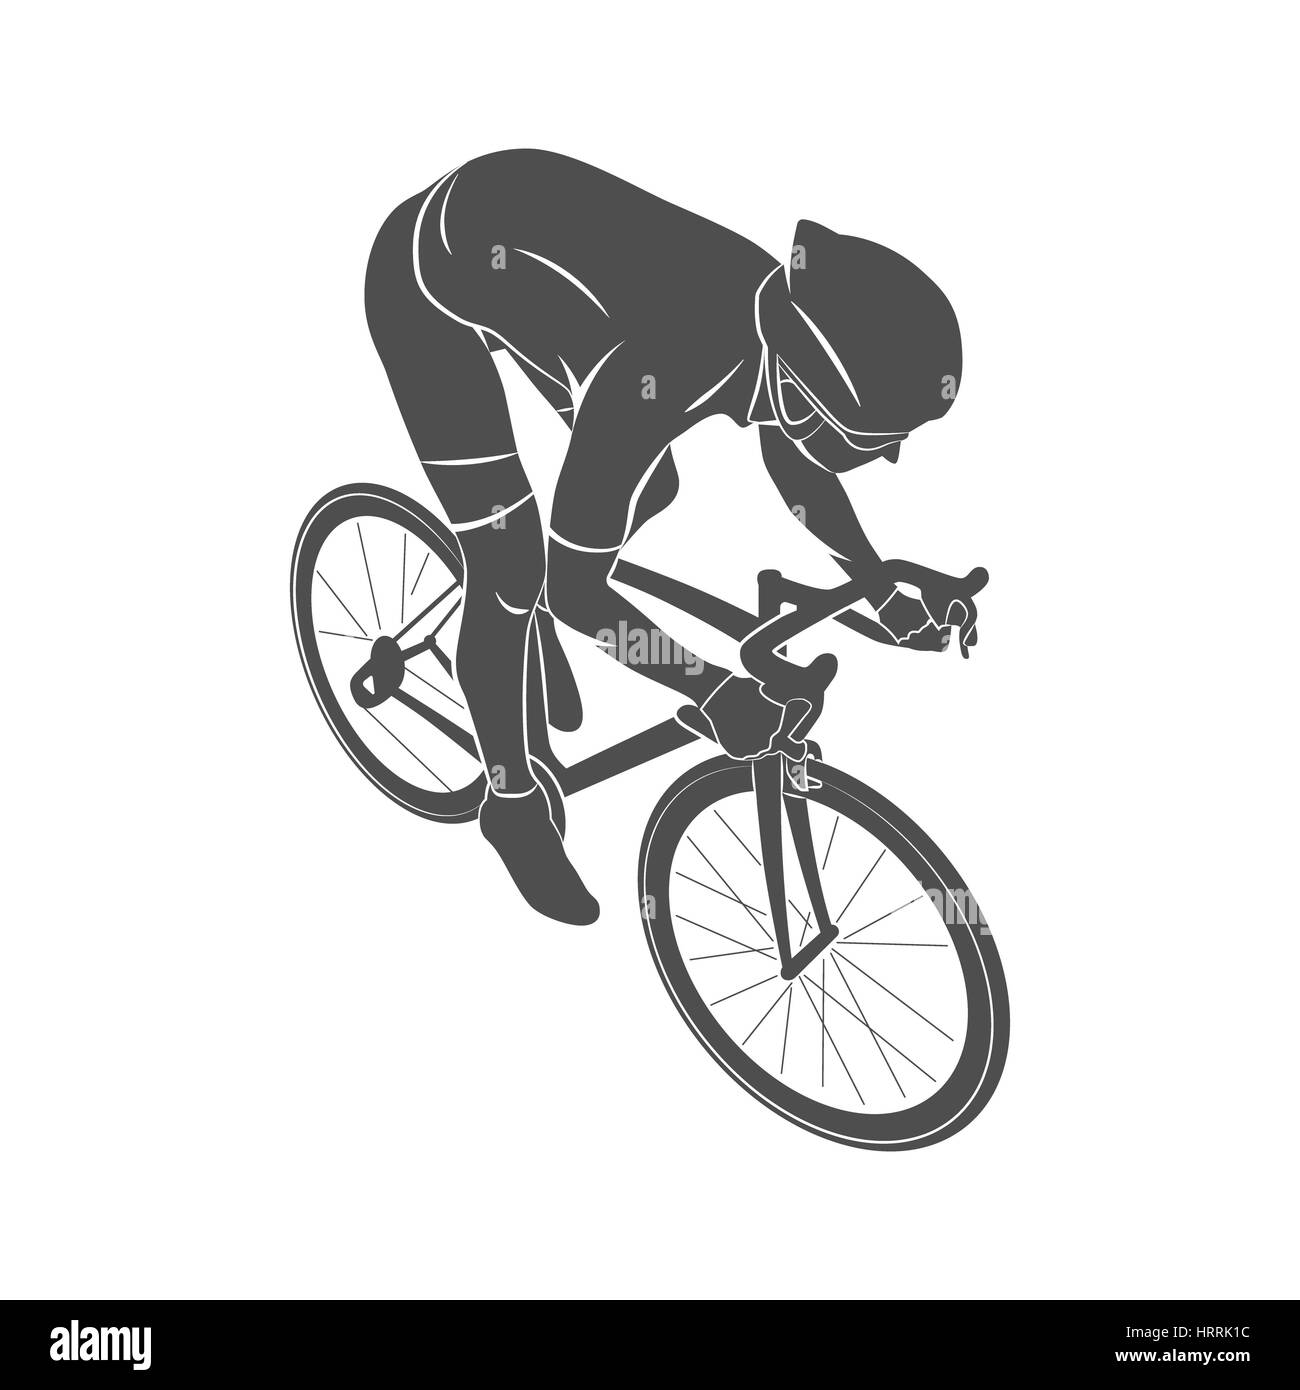 Cyclist on a race track on a white background. Photo illustration. Stock Photo